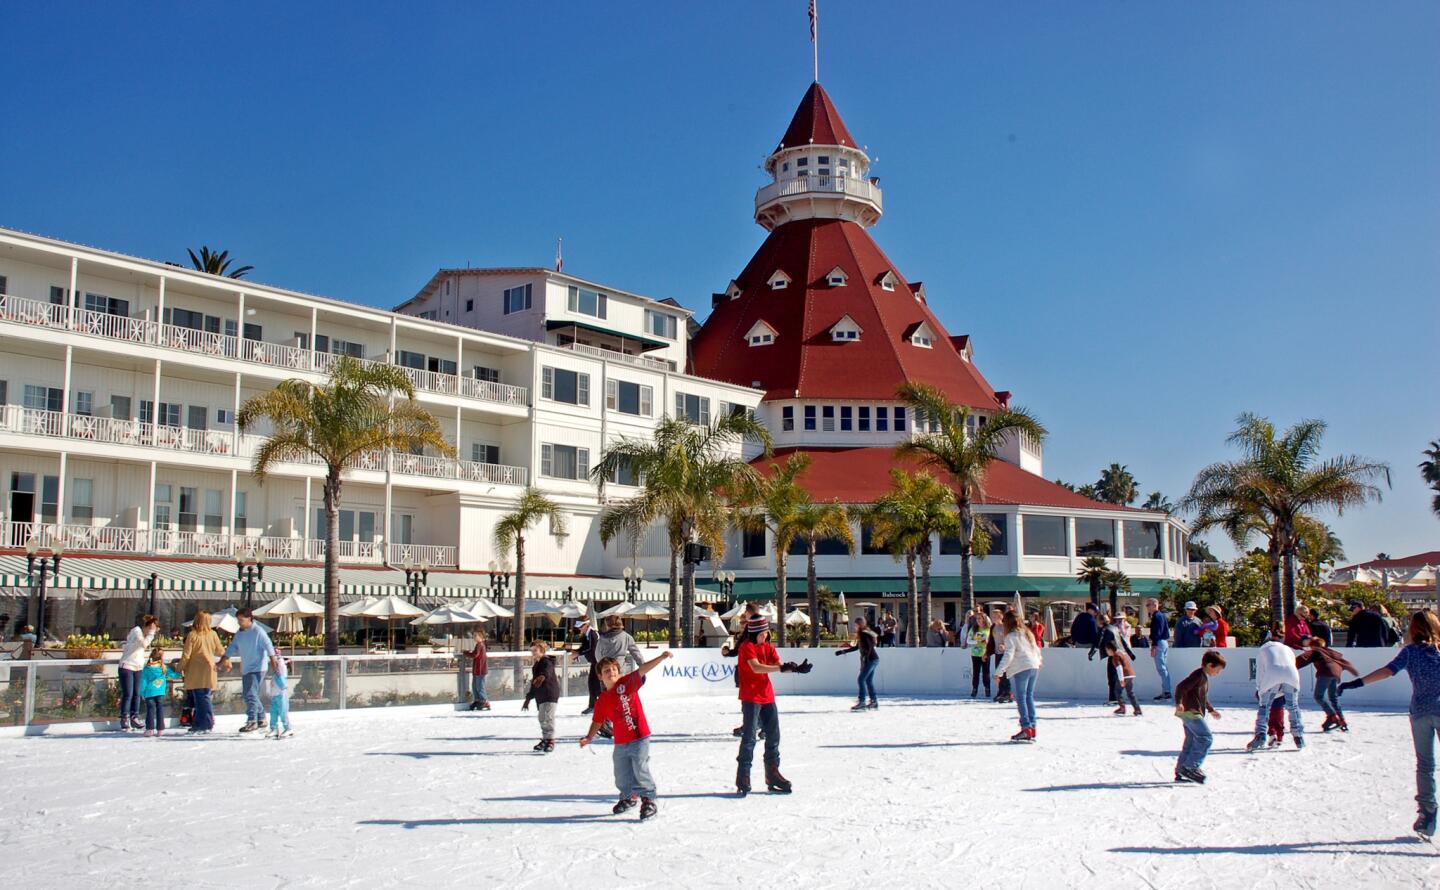 2. Hotel del Coronado The red-roofed Hotel del Coronado, which dates to the 19th century, stands a few miles from downtown San Diego. Distance: 127 miles More info: • Hotel review • Hotel website